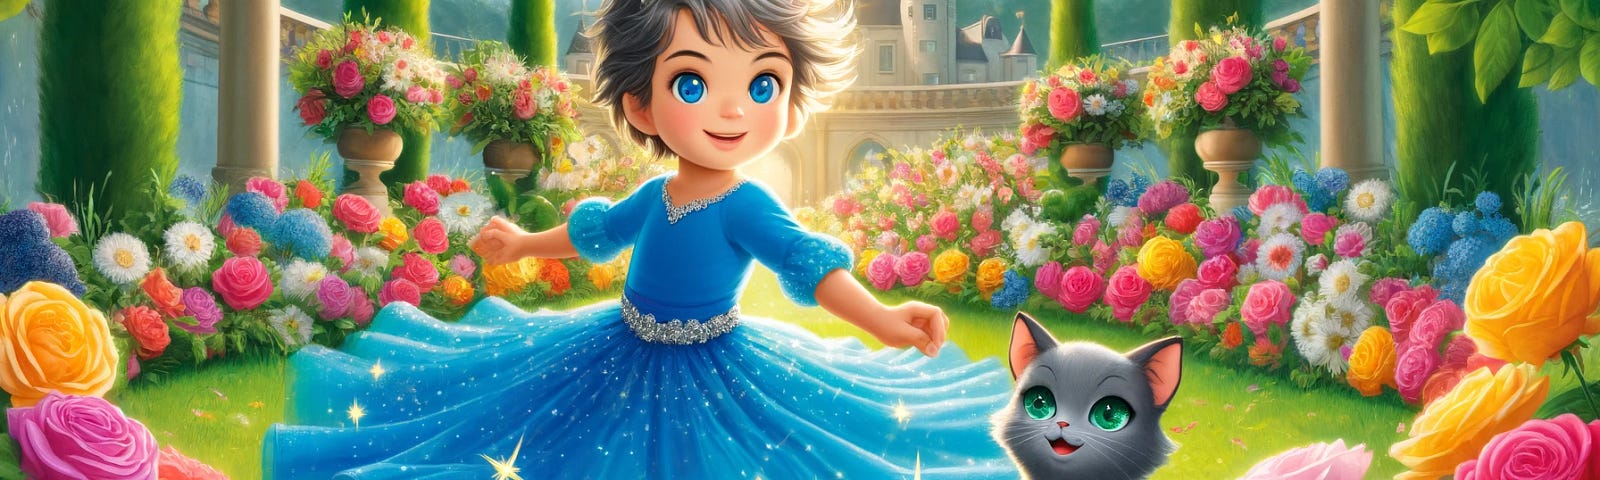 Alex, a little prince, twirls happily in a shimmering blue gown in a vibrant royal garden, with Luna the cat nearby. The garden blooms with colourful flowers under a clear blue sky